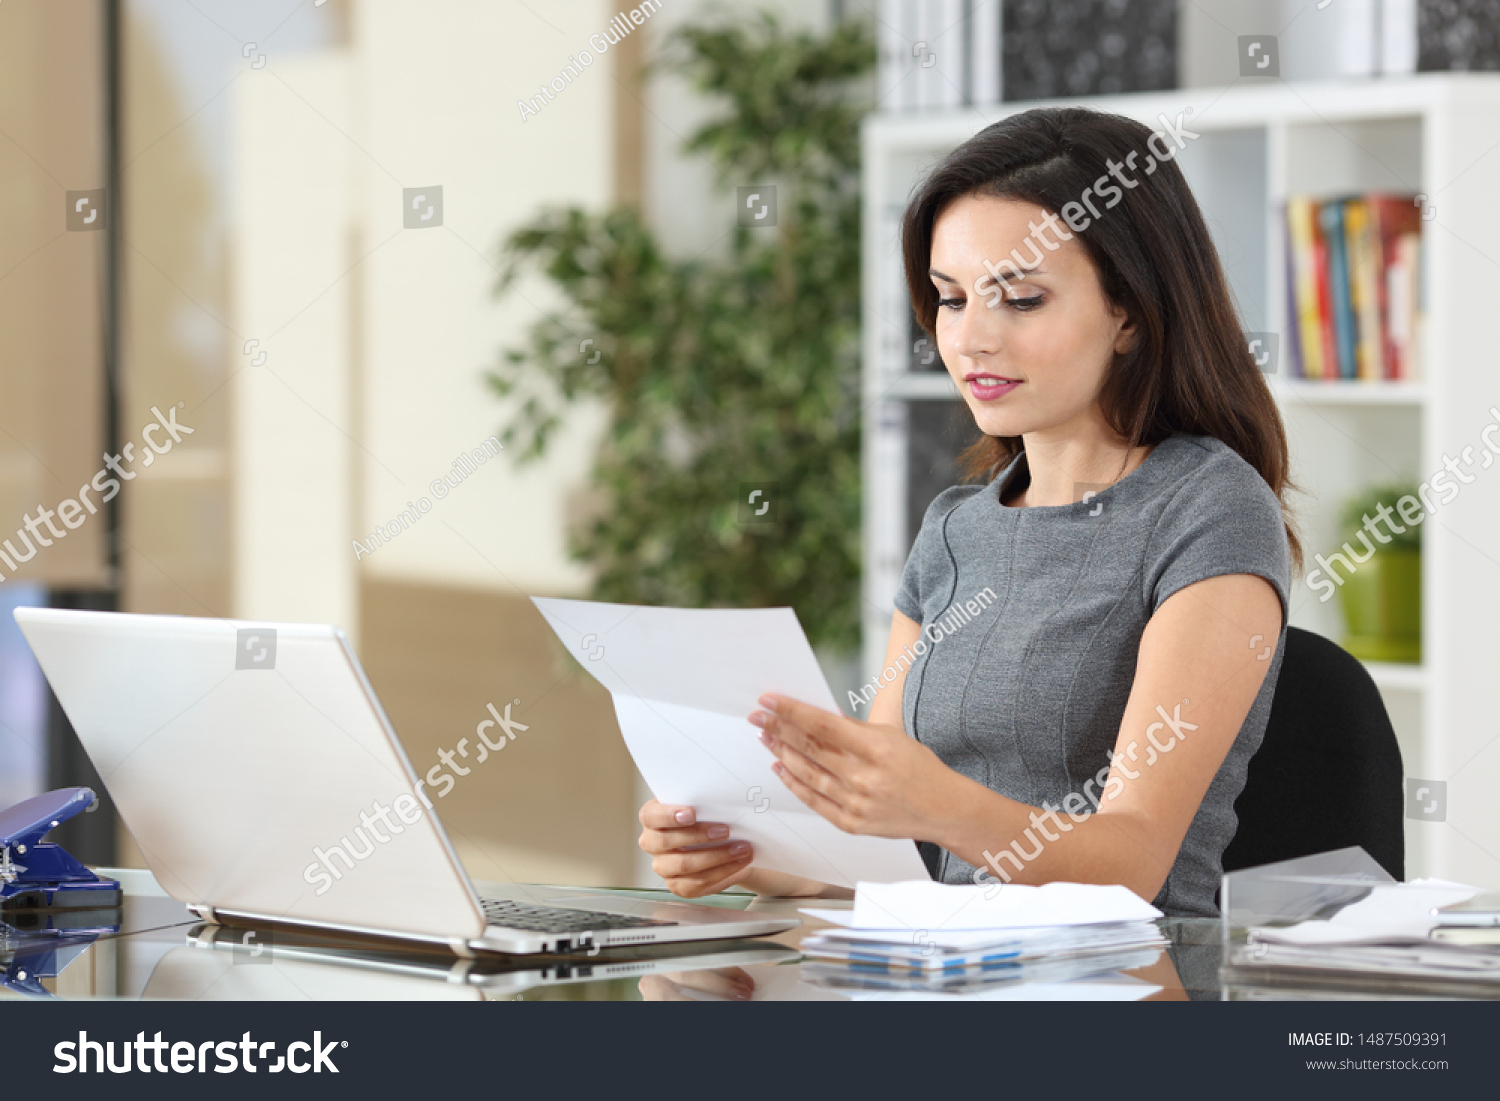 Serious Office Worker Reading Paper Letter Stock Photo 1487509391 ...